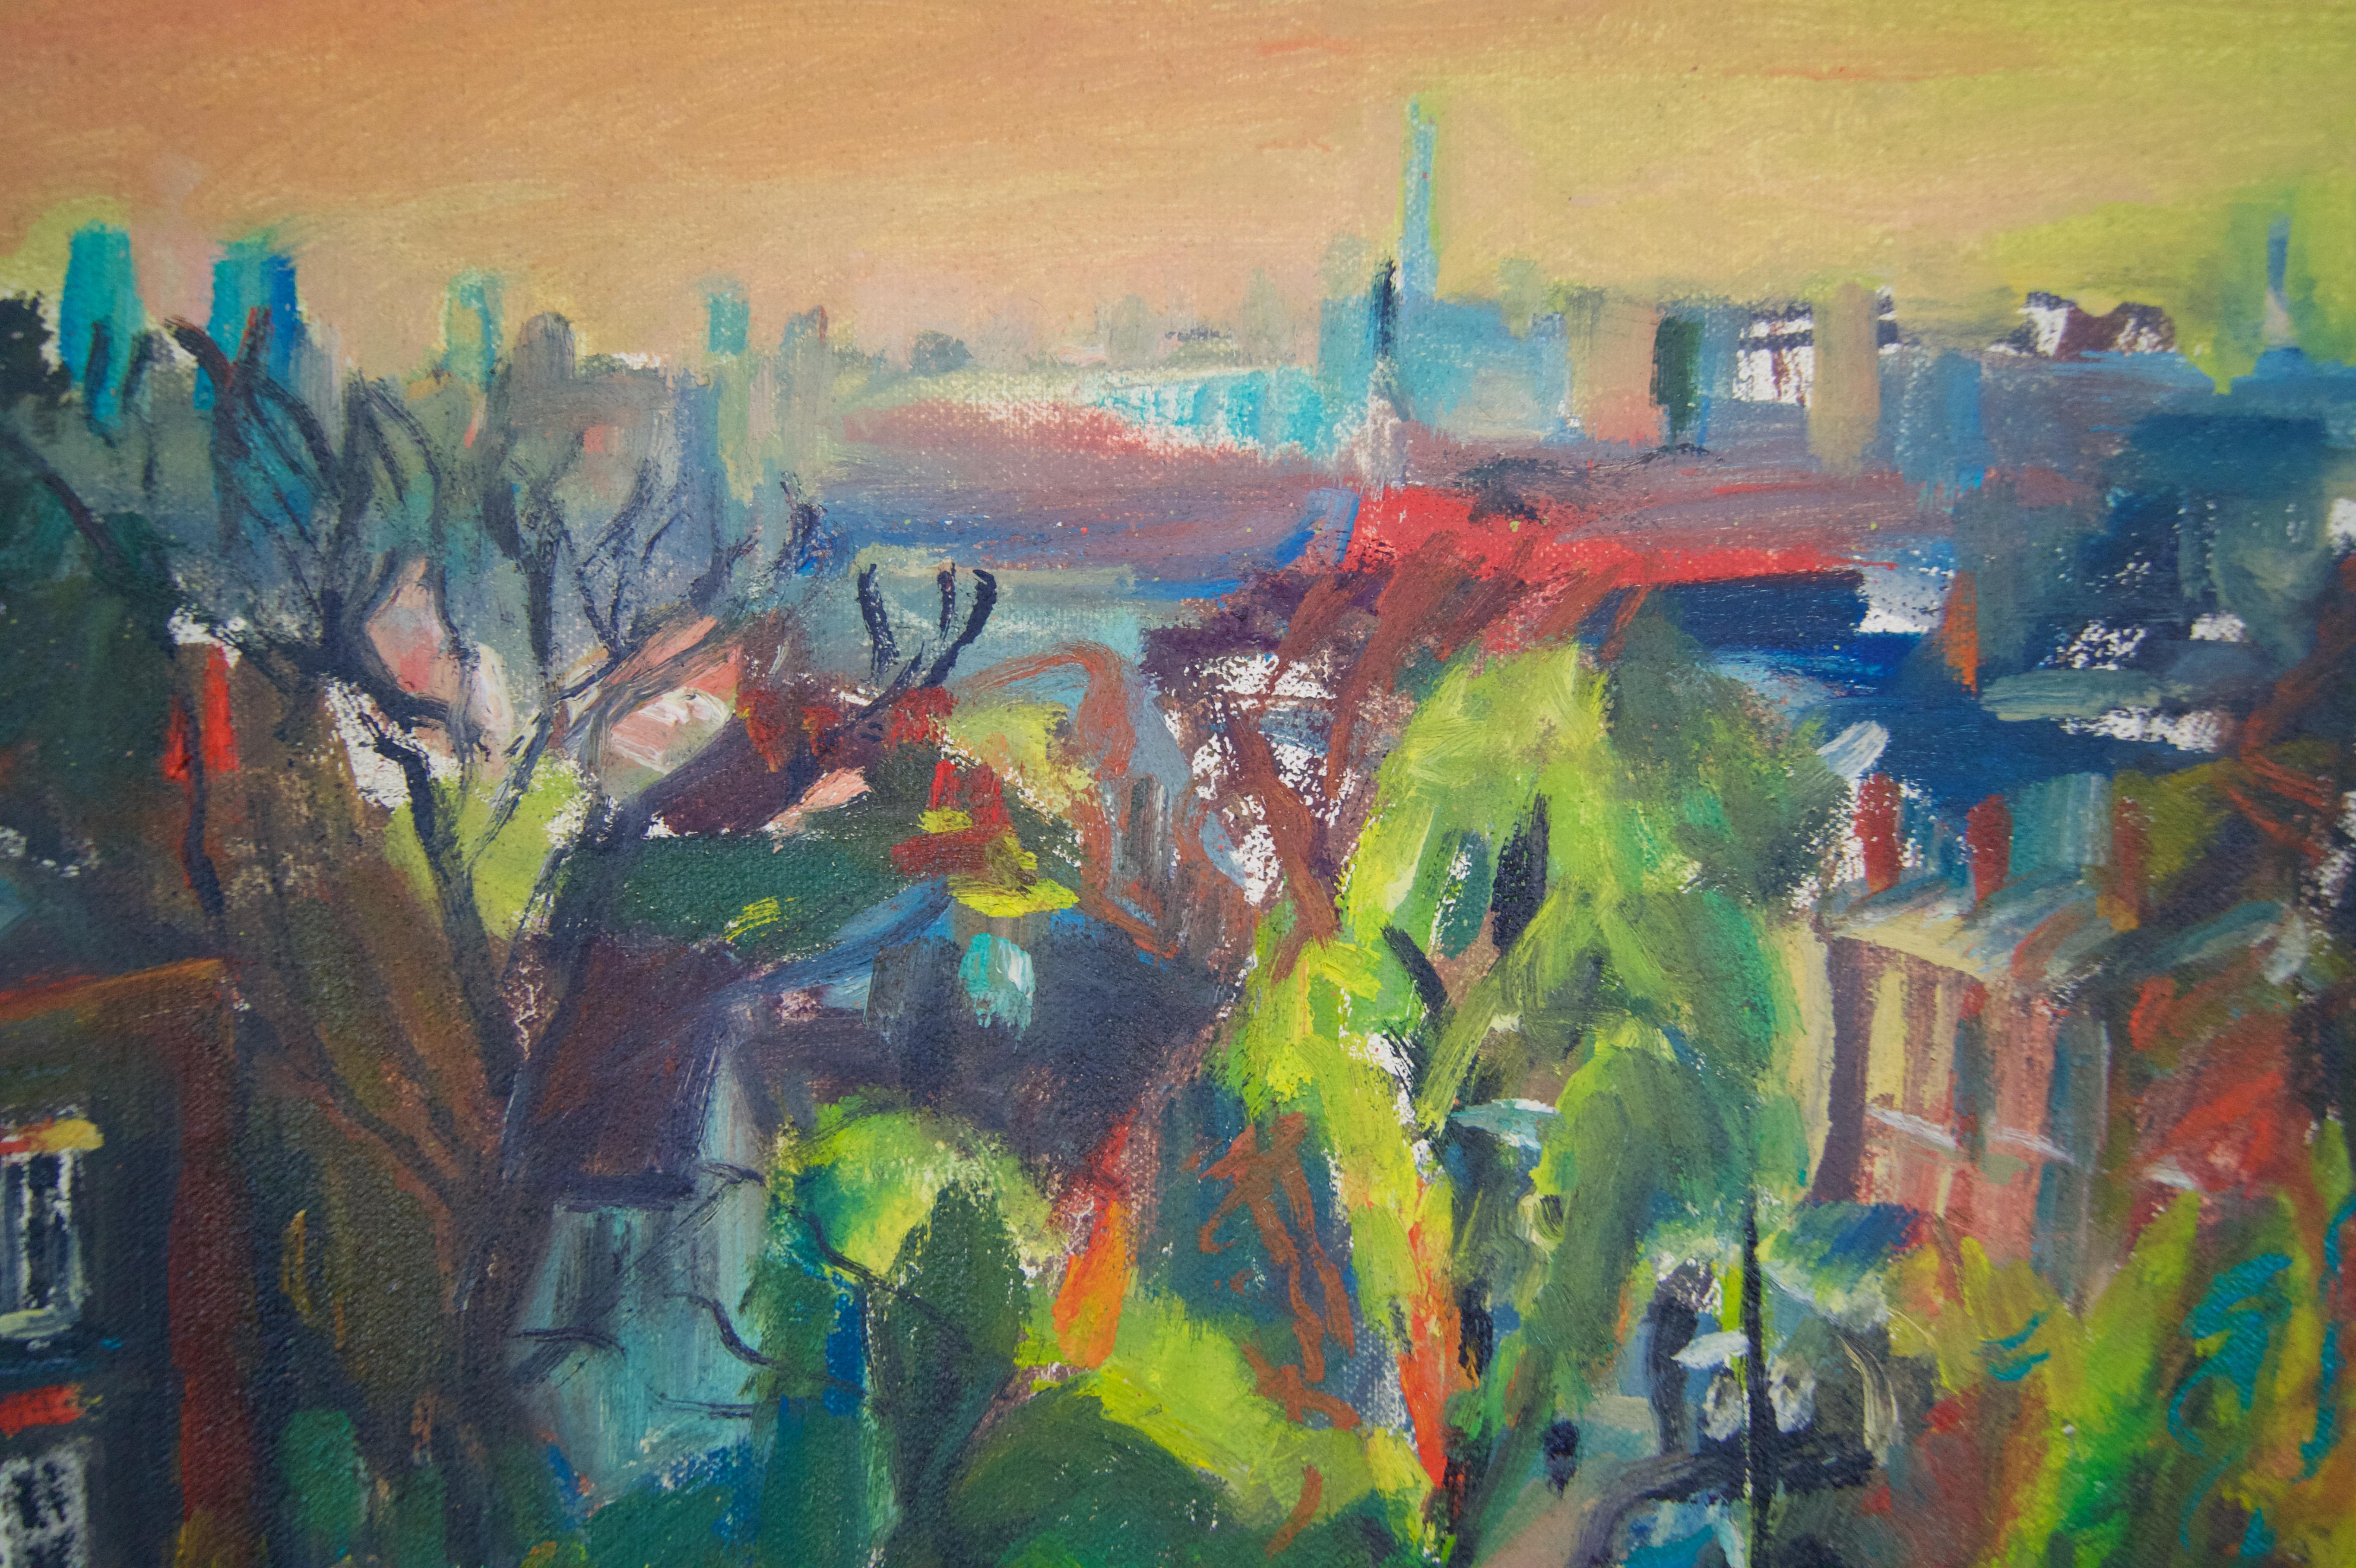 London Suburb - Late 20th Century Landscape Oil in London by Milne - Contemporary Art by Vincent Milne